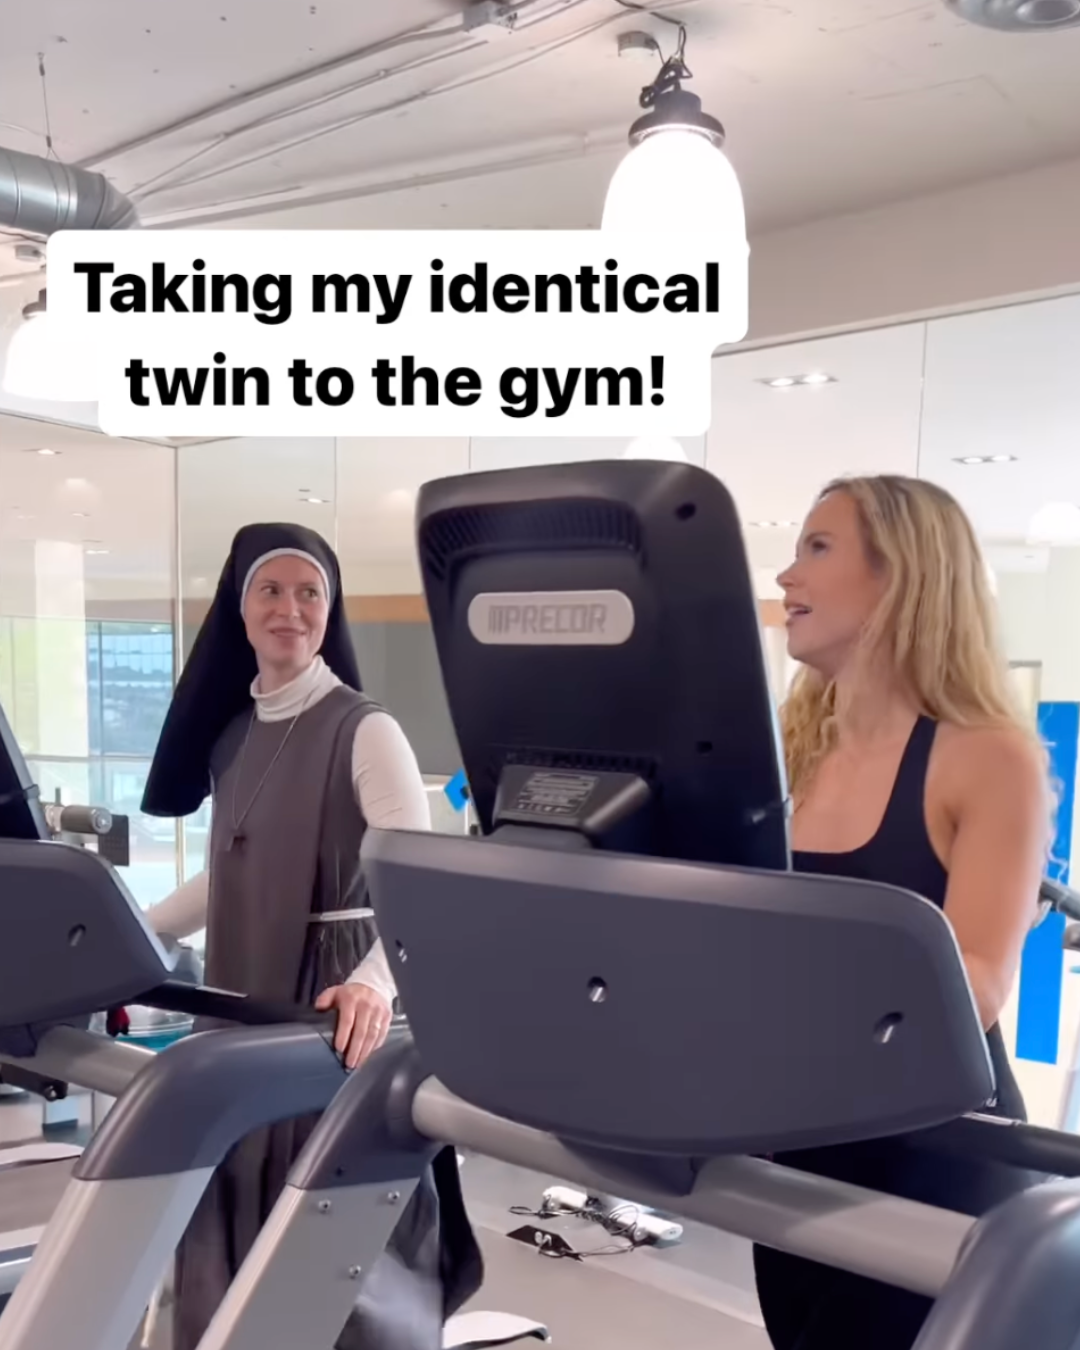 catholic nun, franciscan sister, christie anderson, fitness, vocations, religious vocations, instagram reels